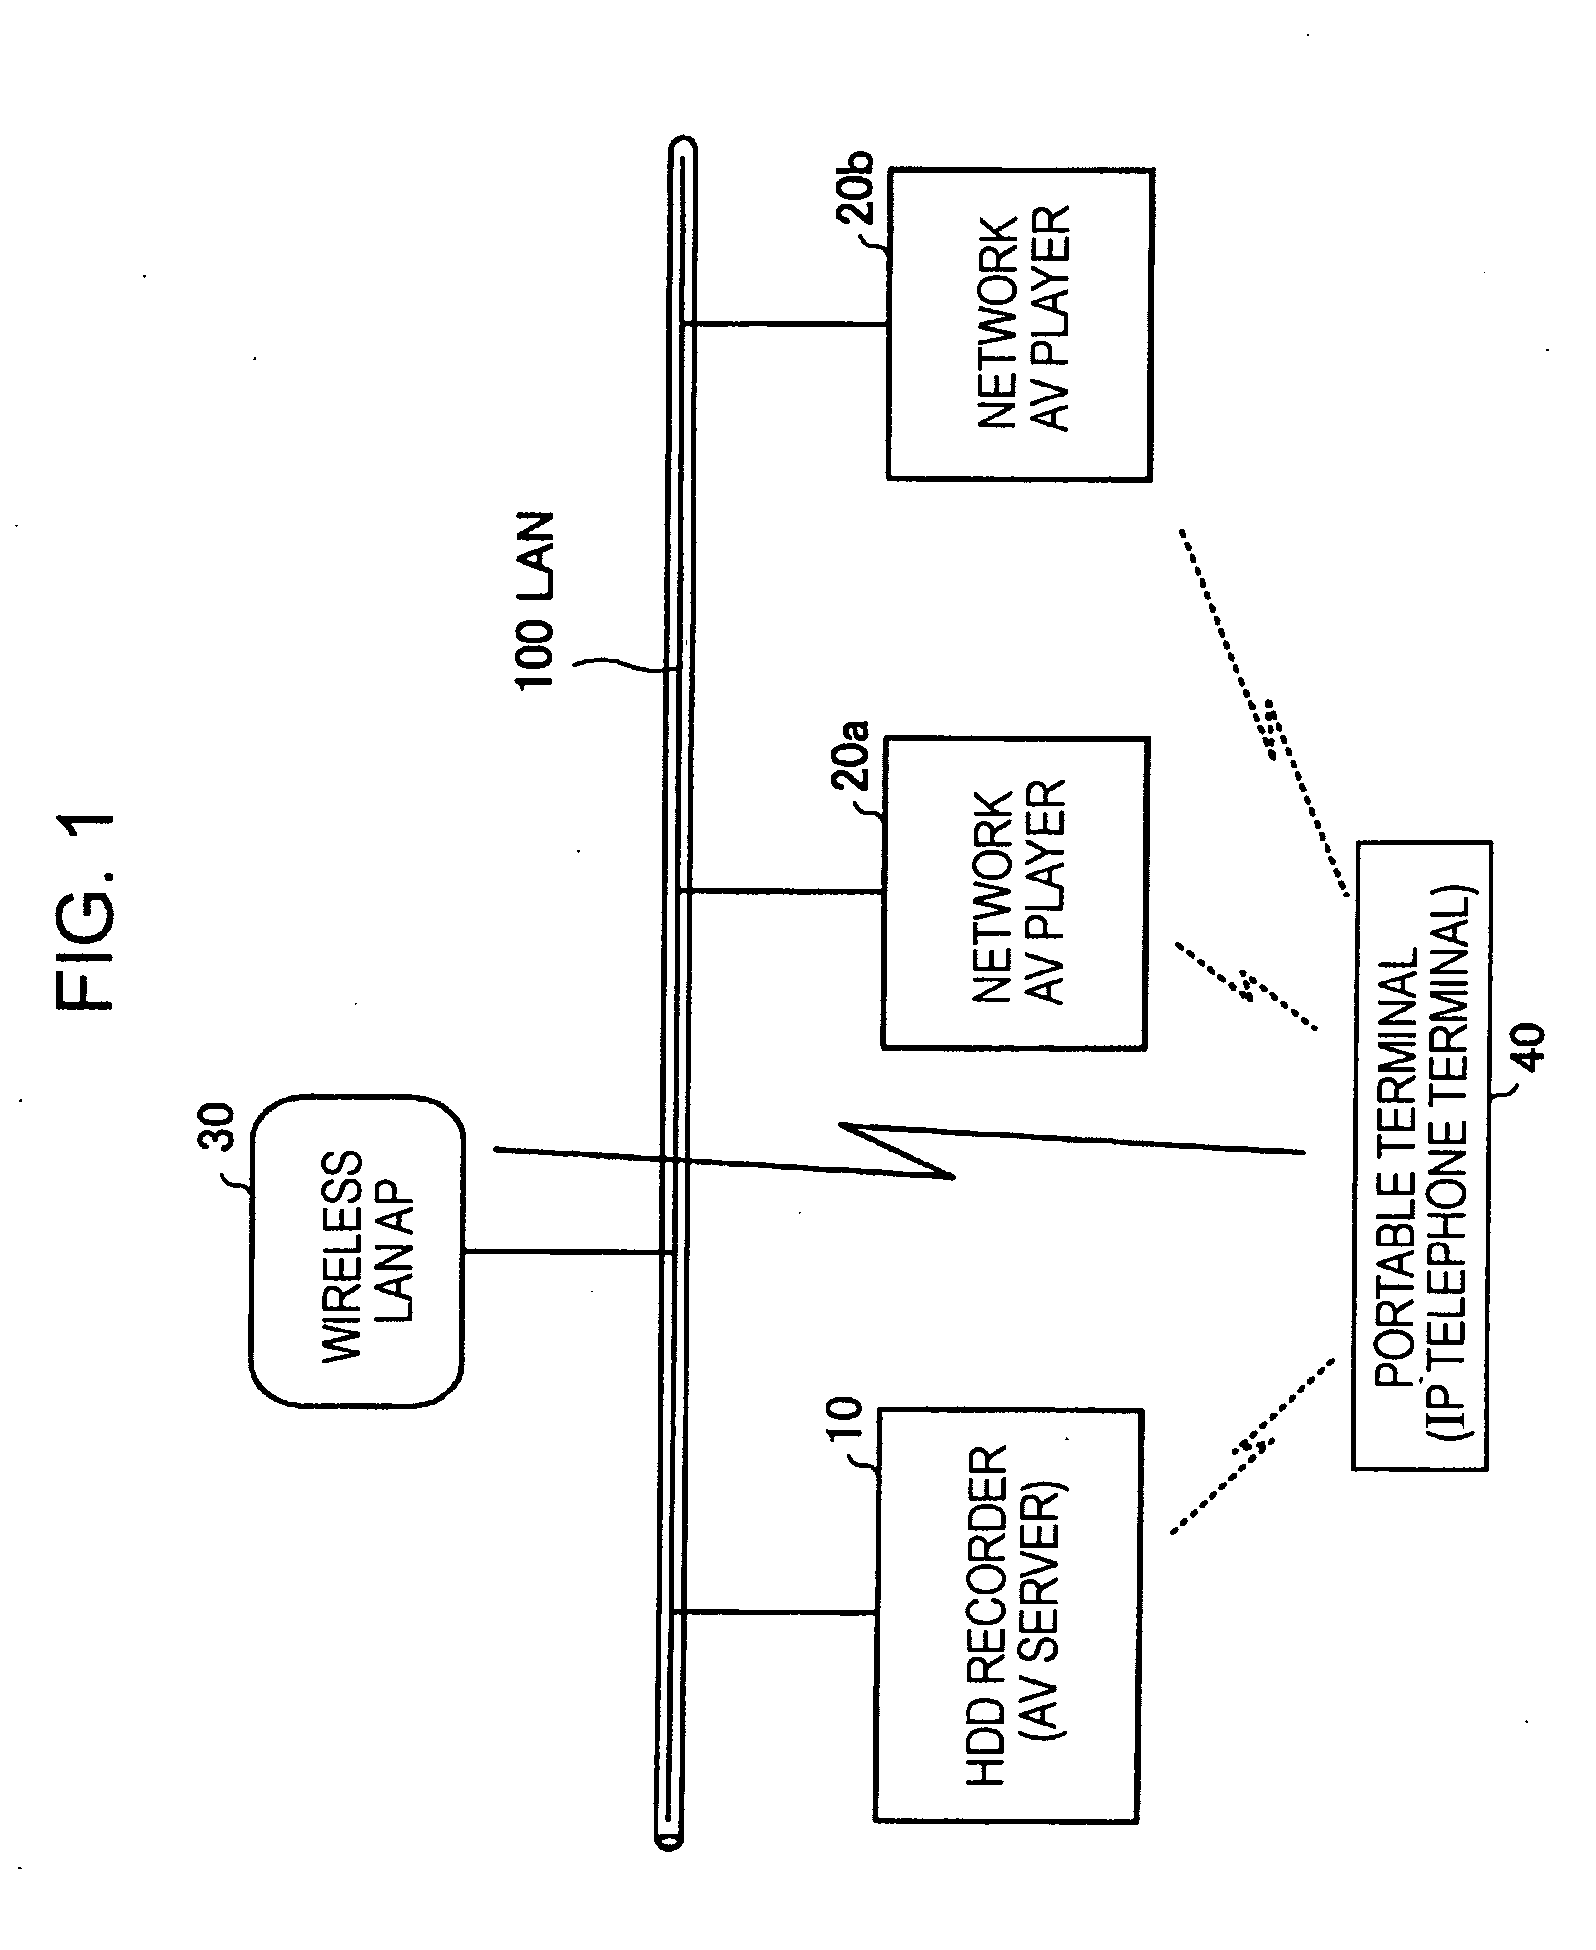 Content playback system, content playback apparatus, and content playback method